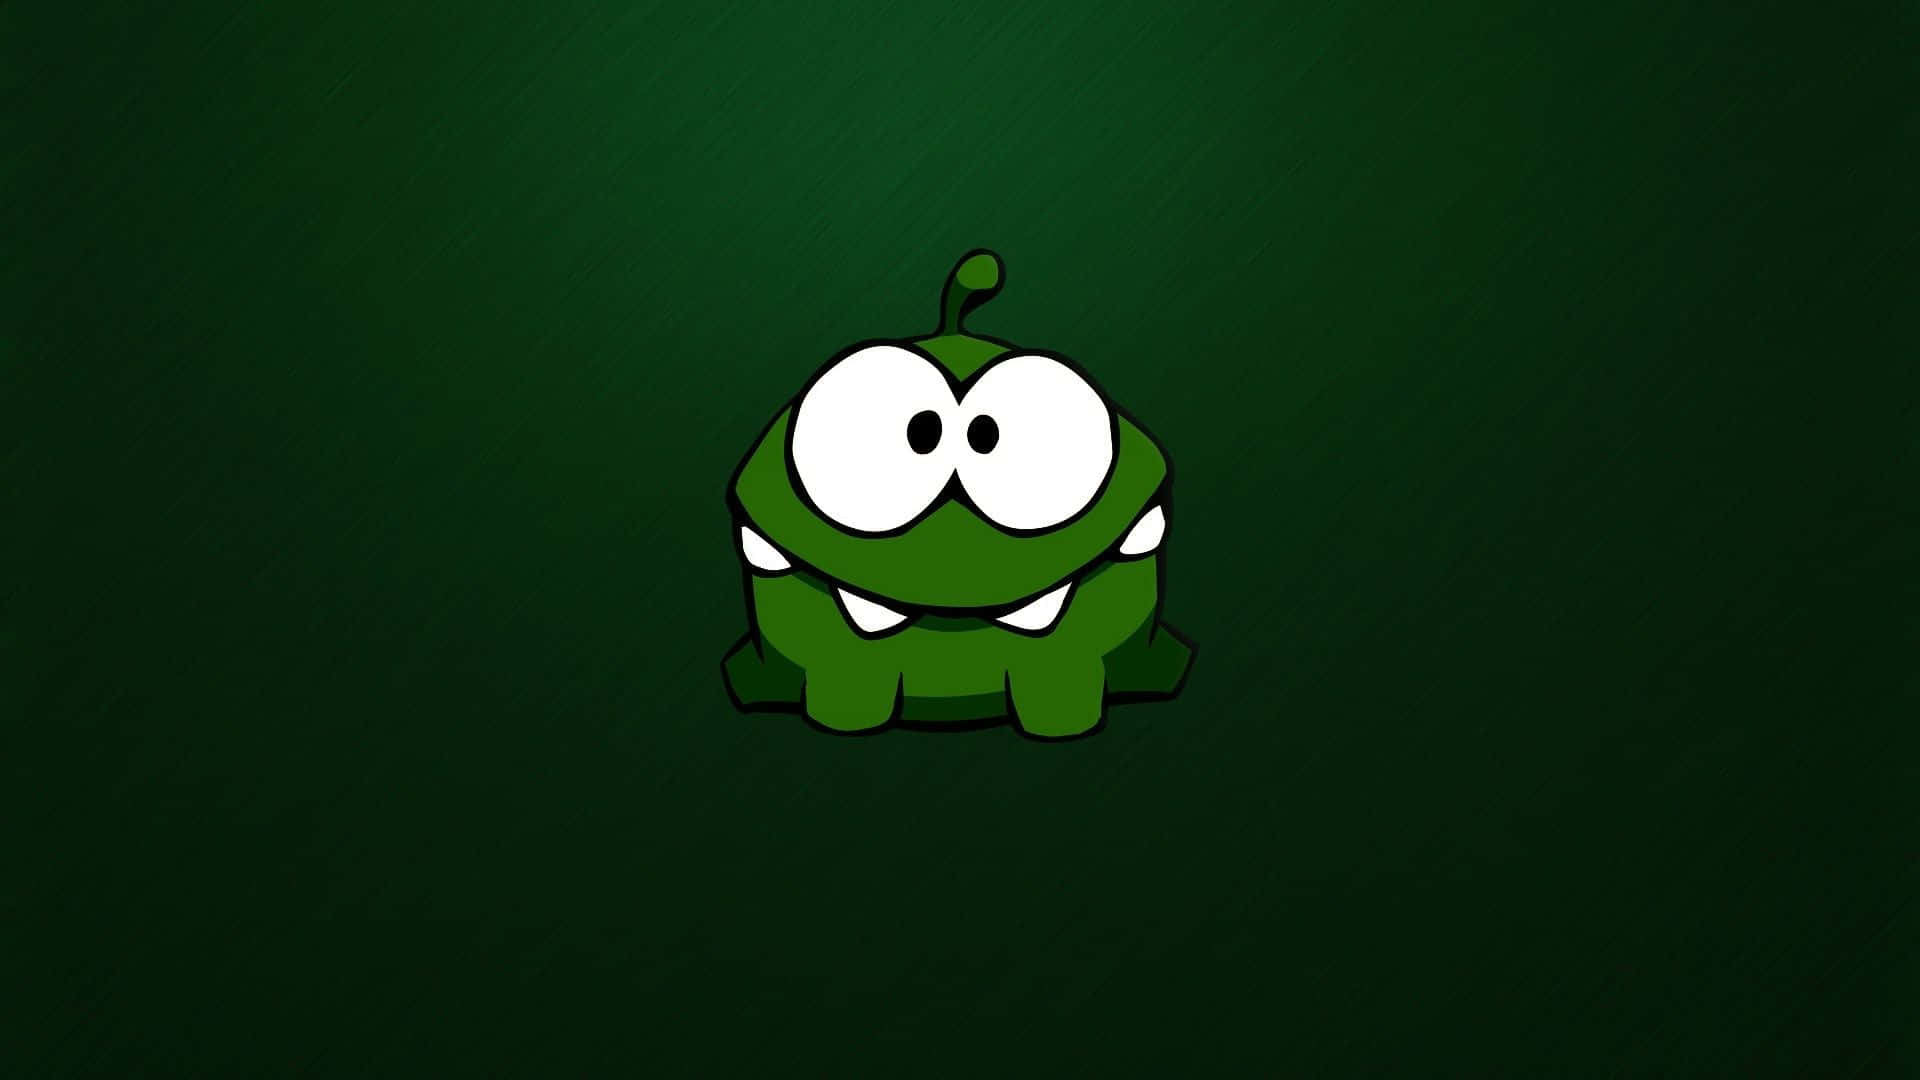 Look At This Adorable Green Color! Wallpaper